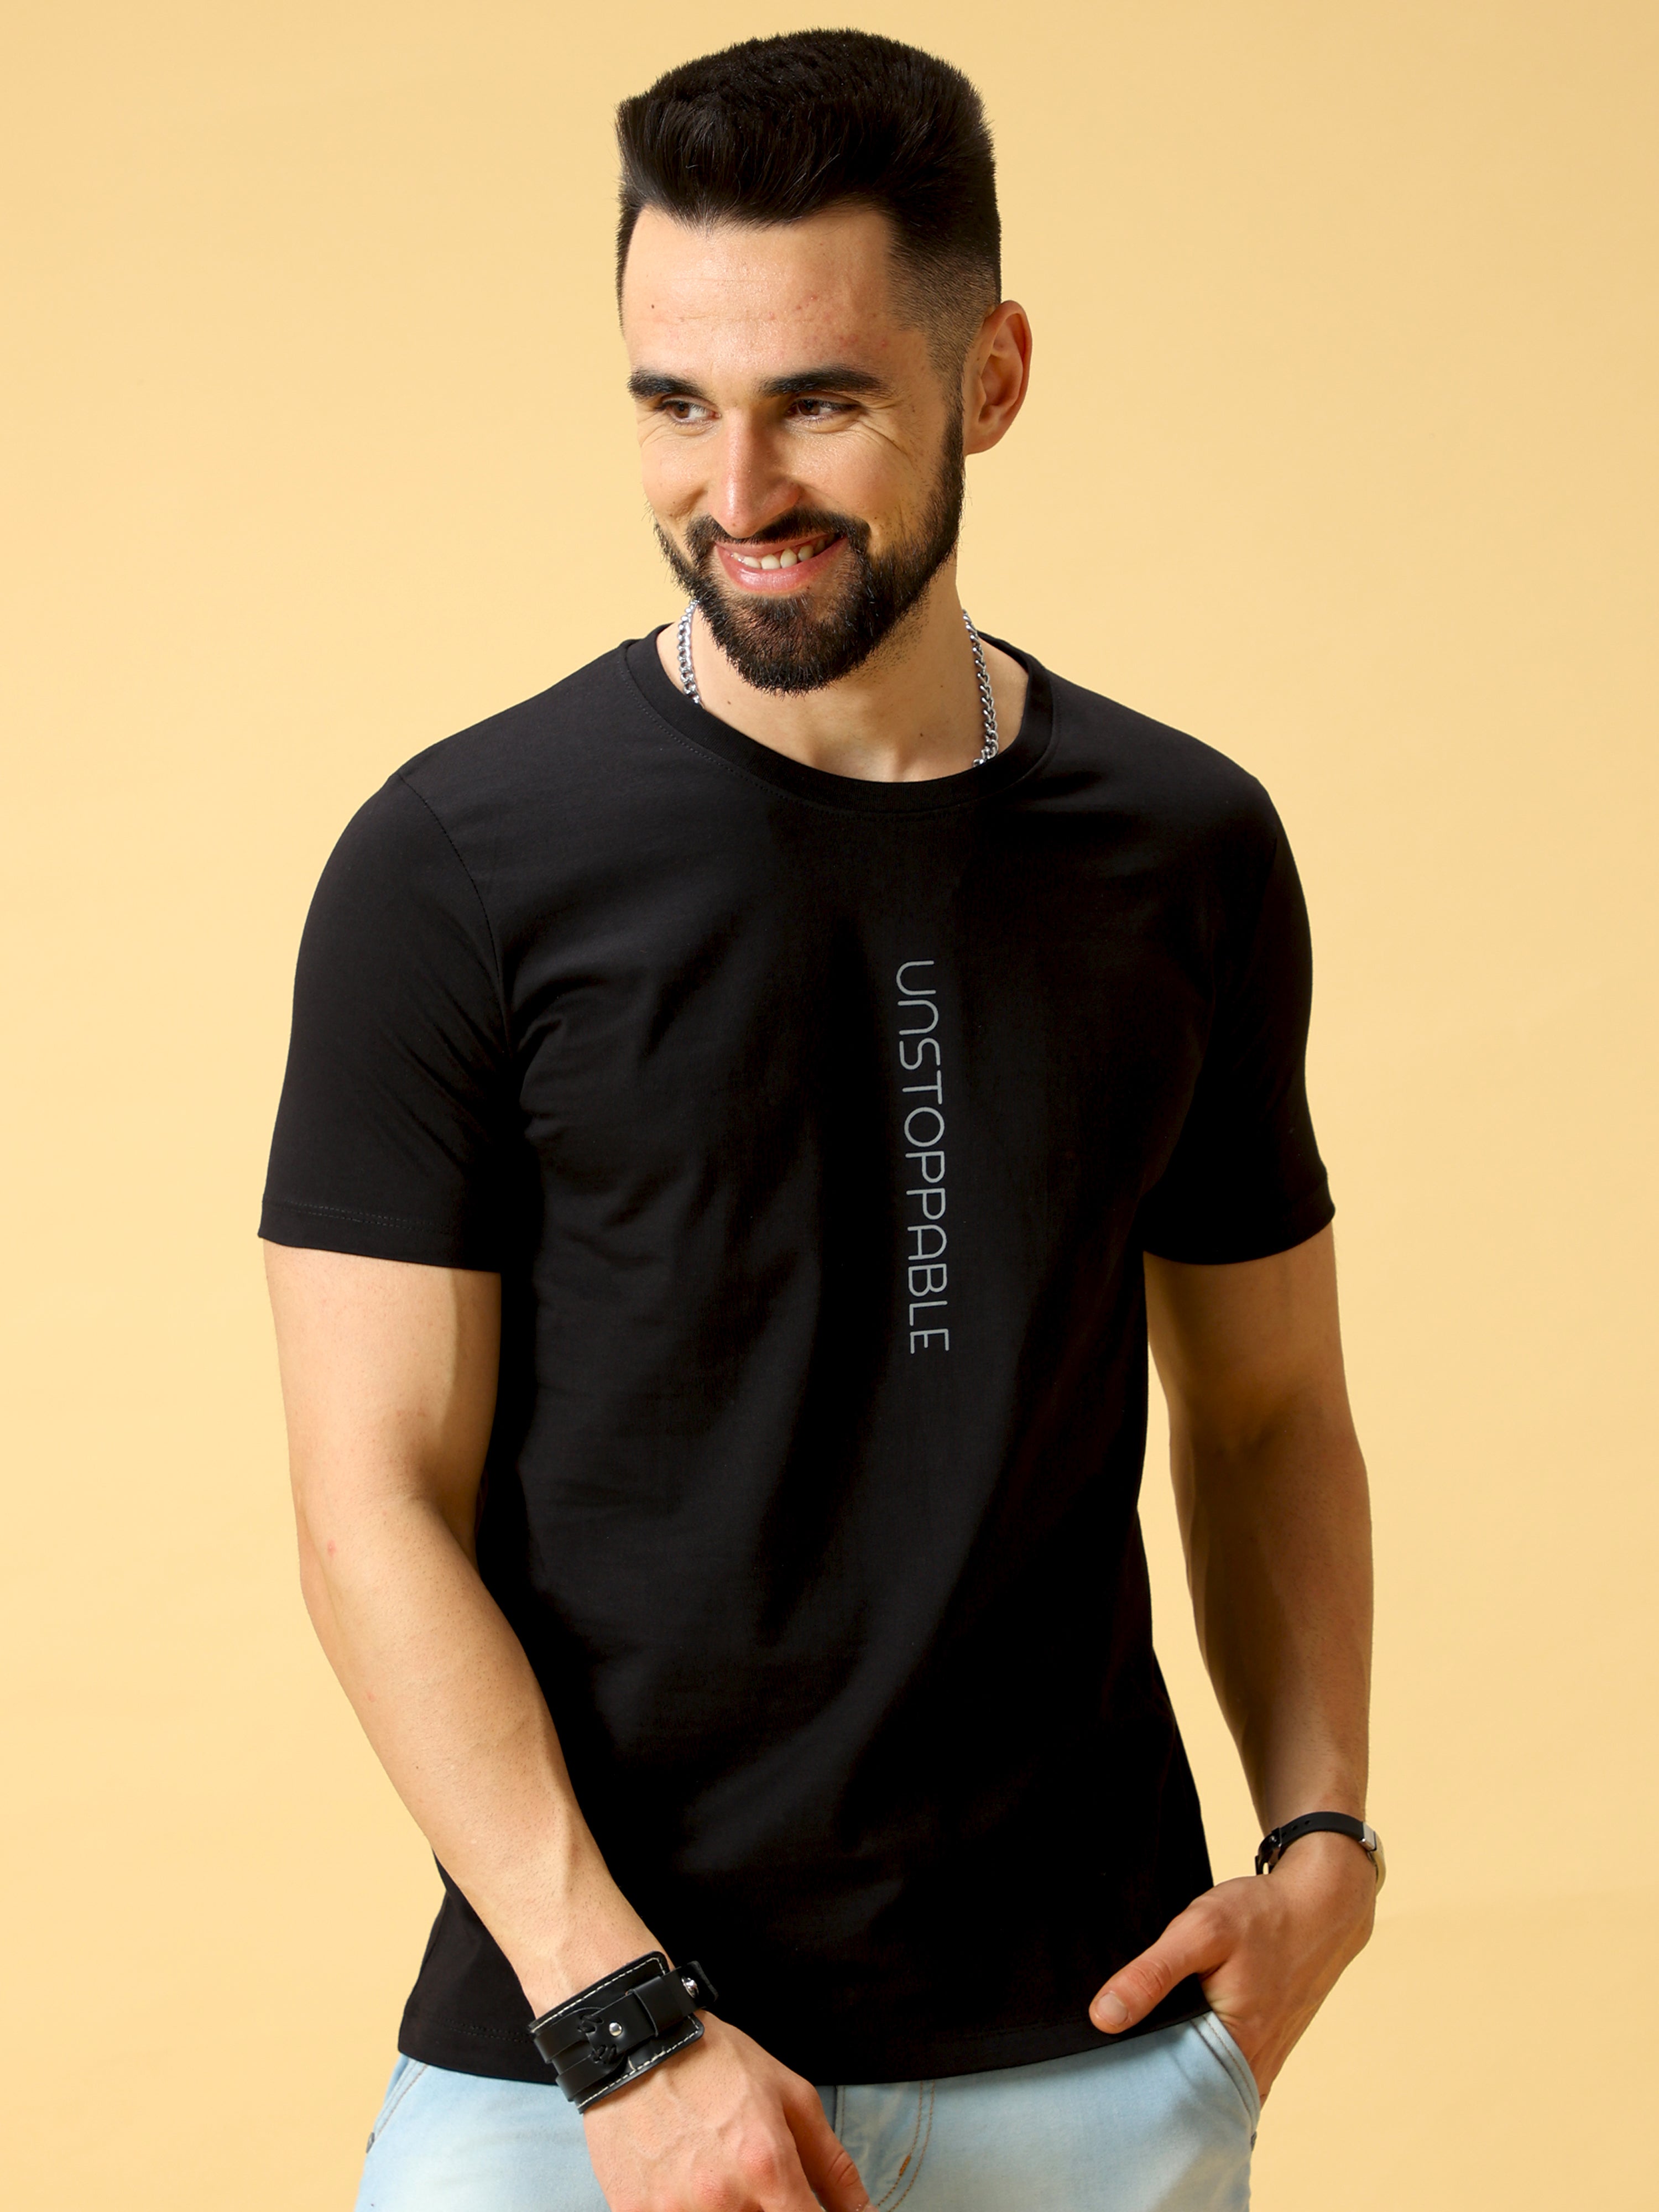 Unstoppable Grey Print Crew Neck T-Shirt shop online at Estilocus. This pure cotton printed T-shirt is a stylish go-to for laidback days. Cut in a comfy regular fit. • 100% Cotton knitted interlock 190GSM• Bio washed fabric• Round neck T-shirt • Half slee